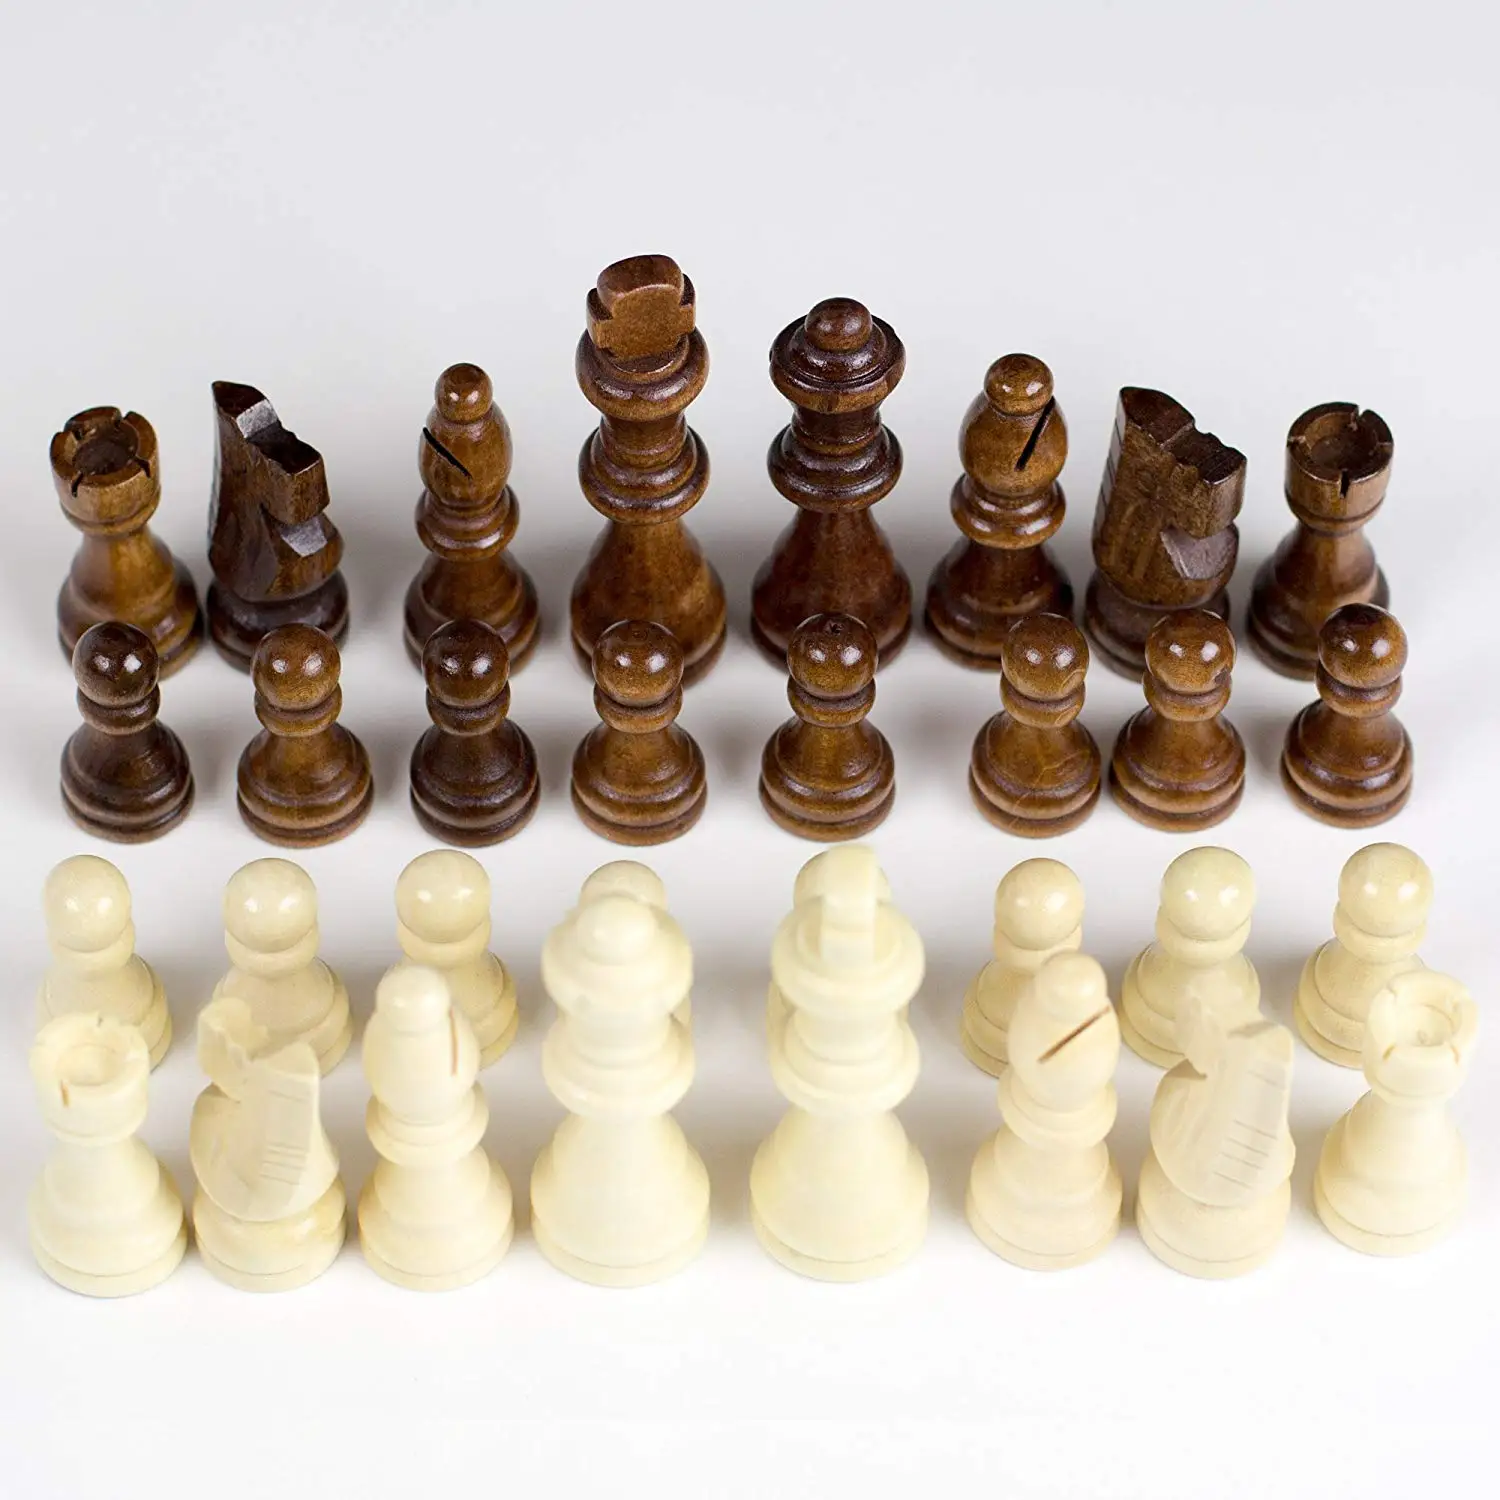 King 7.8 cm Total Weight 160 g New Wooden Chess Set 32 Pieces Pieces Only 